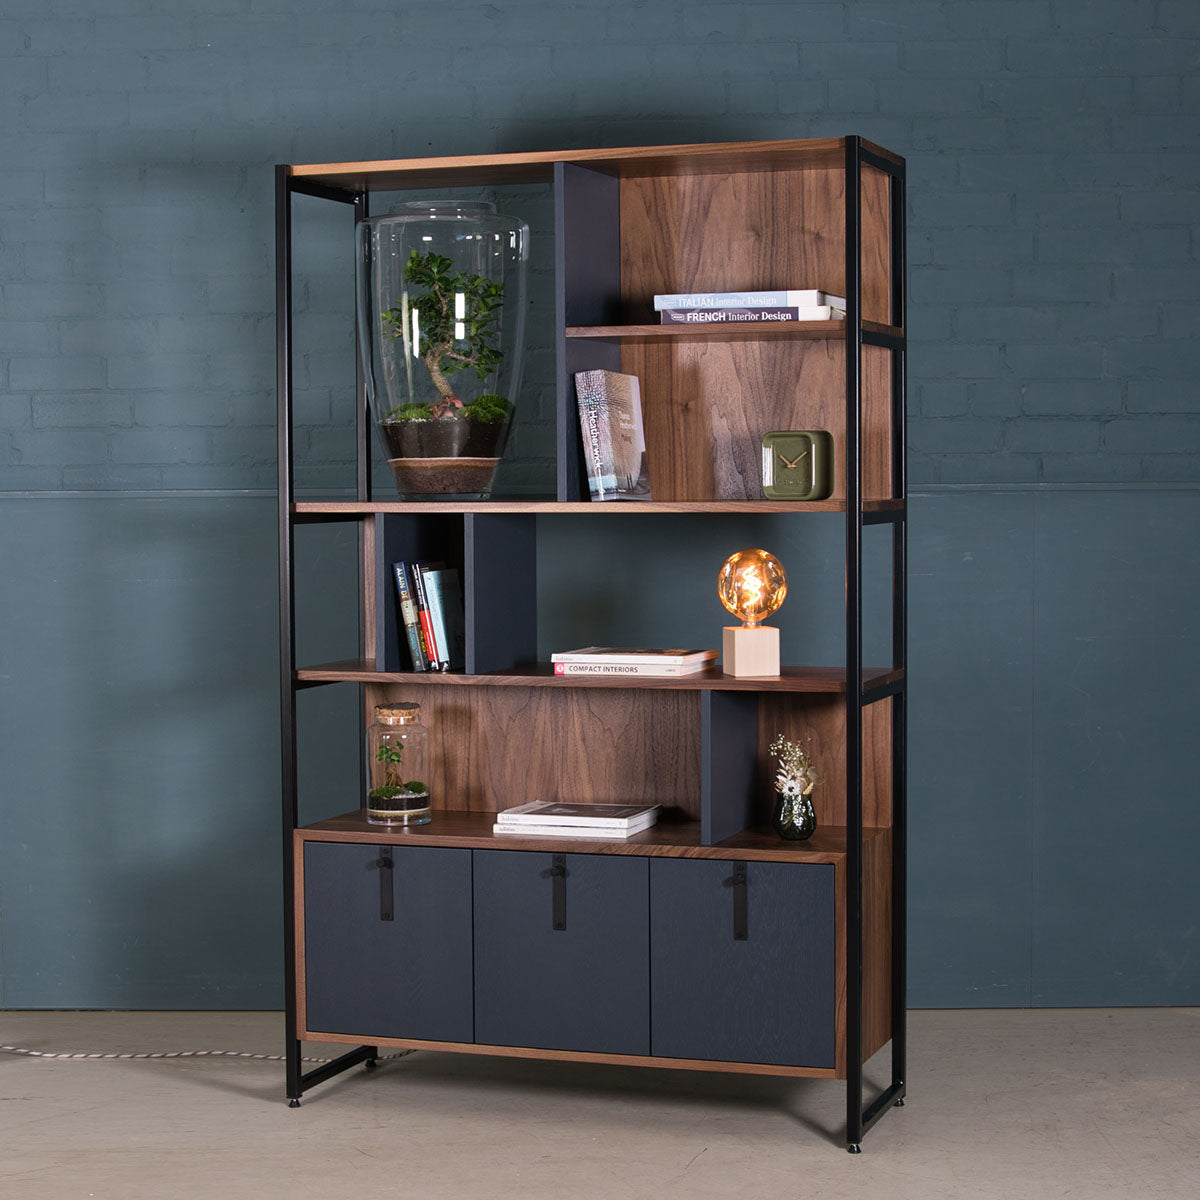 An image of the Walnut Bookcase, Hague product available from Koda Studios